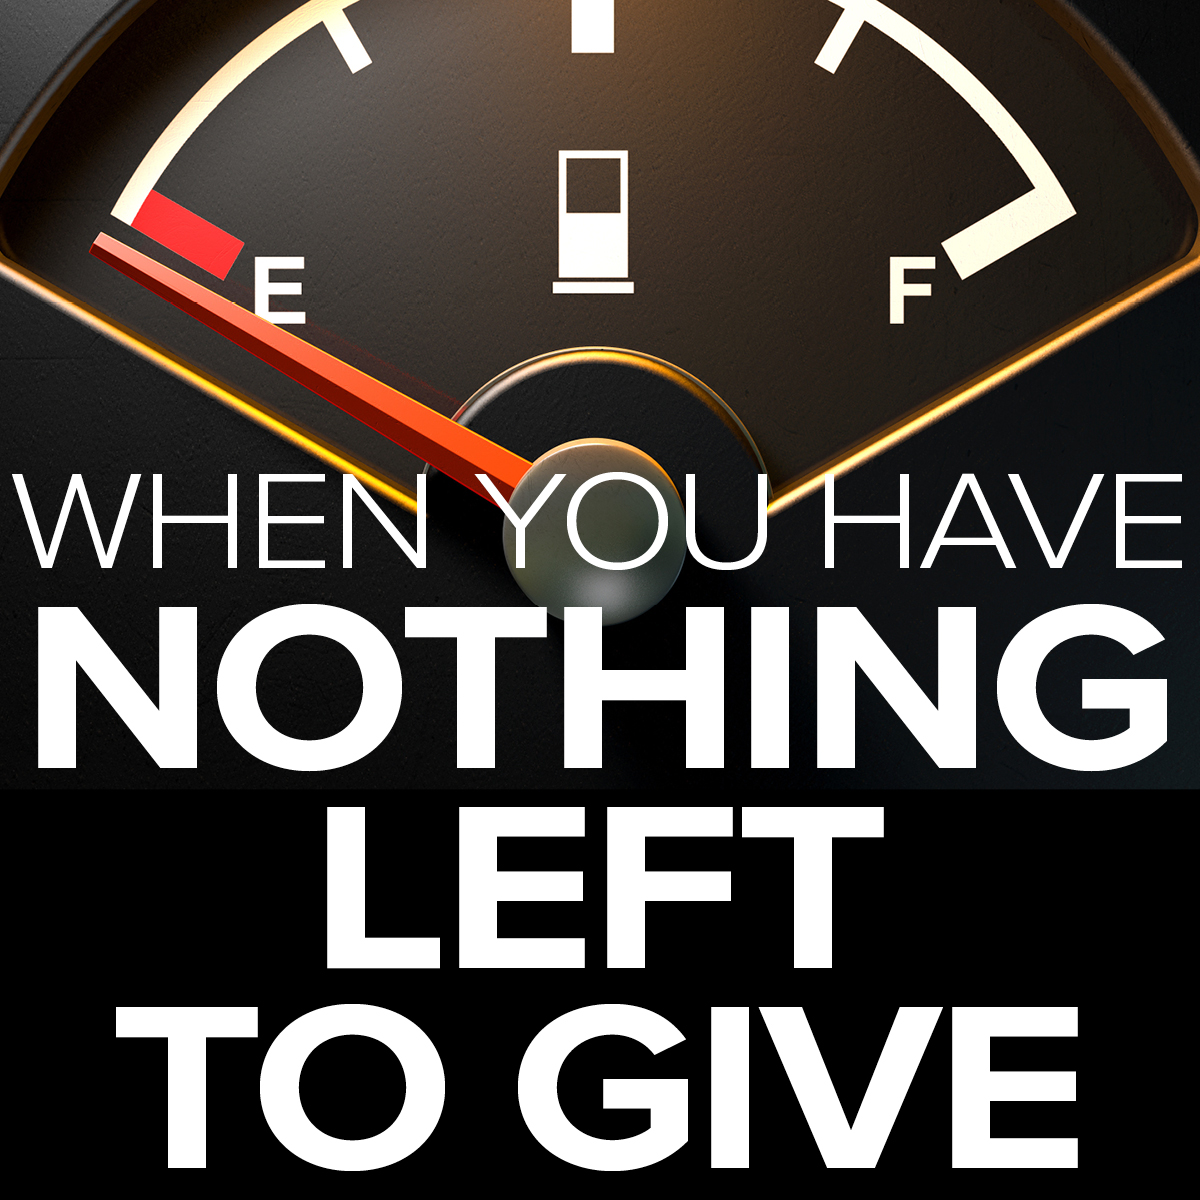 What Do You Do When You Have Nothing Left To Give?